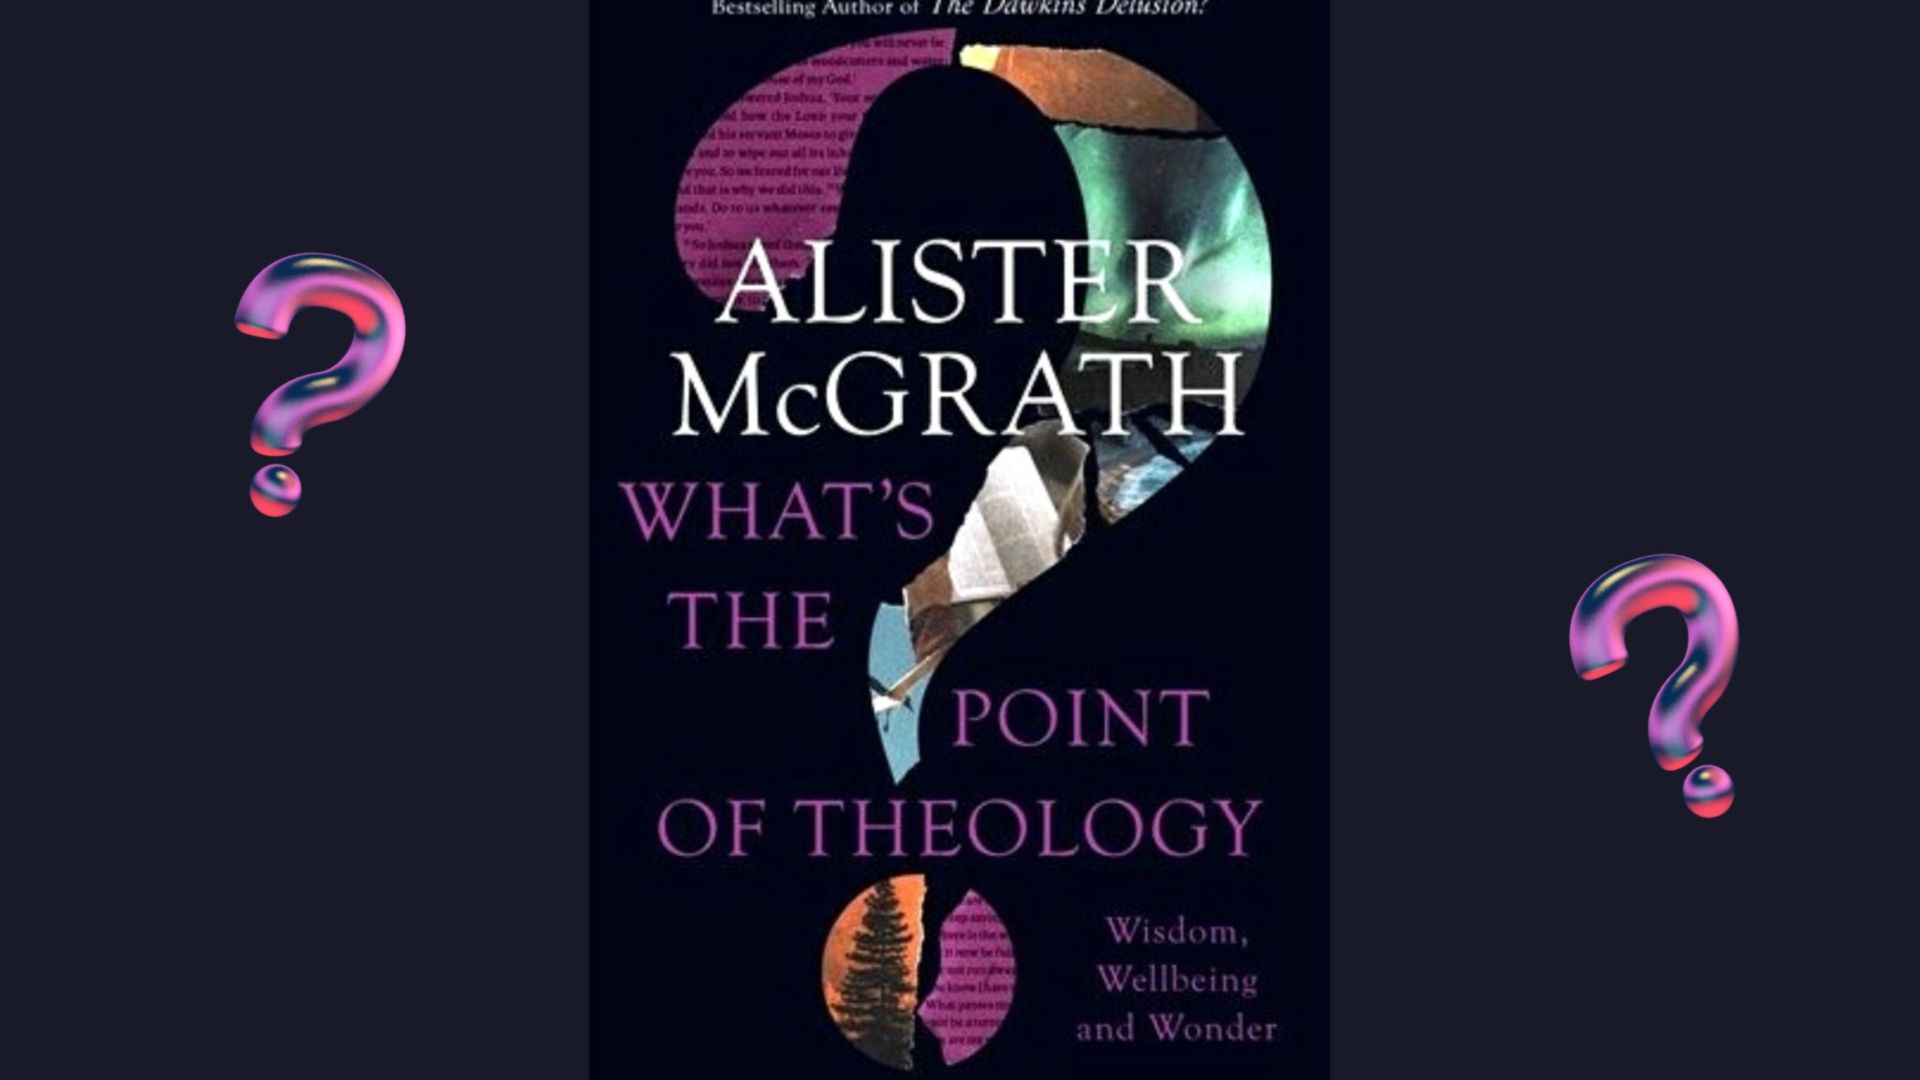 A review of the book 'What's the Point of Theology?' by Alistair McGrath